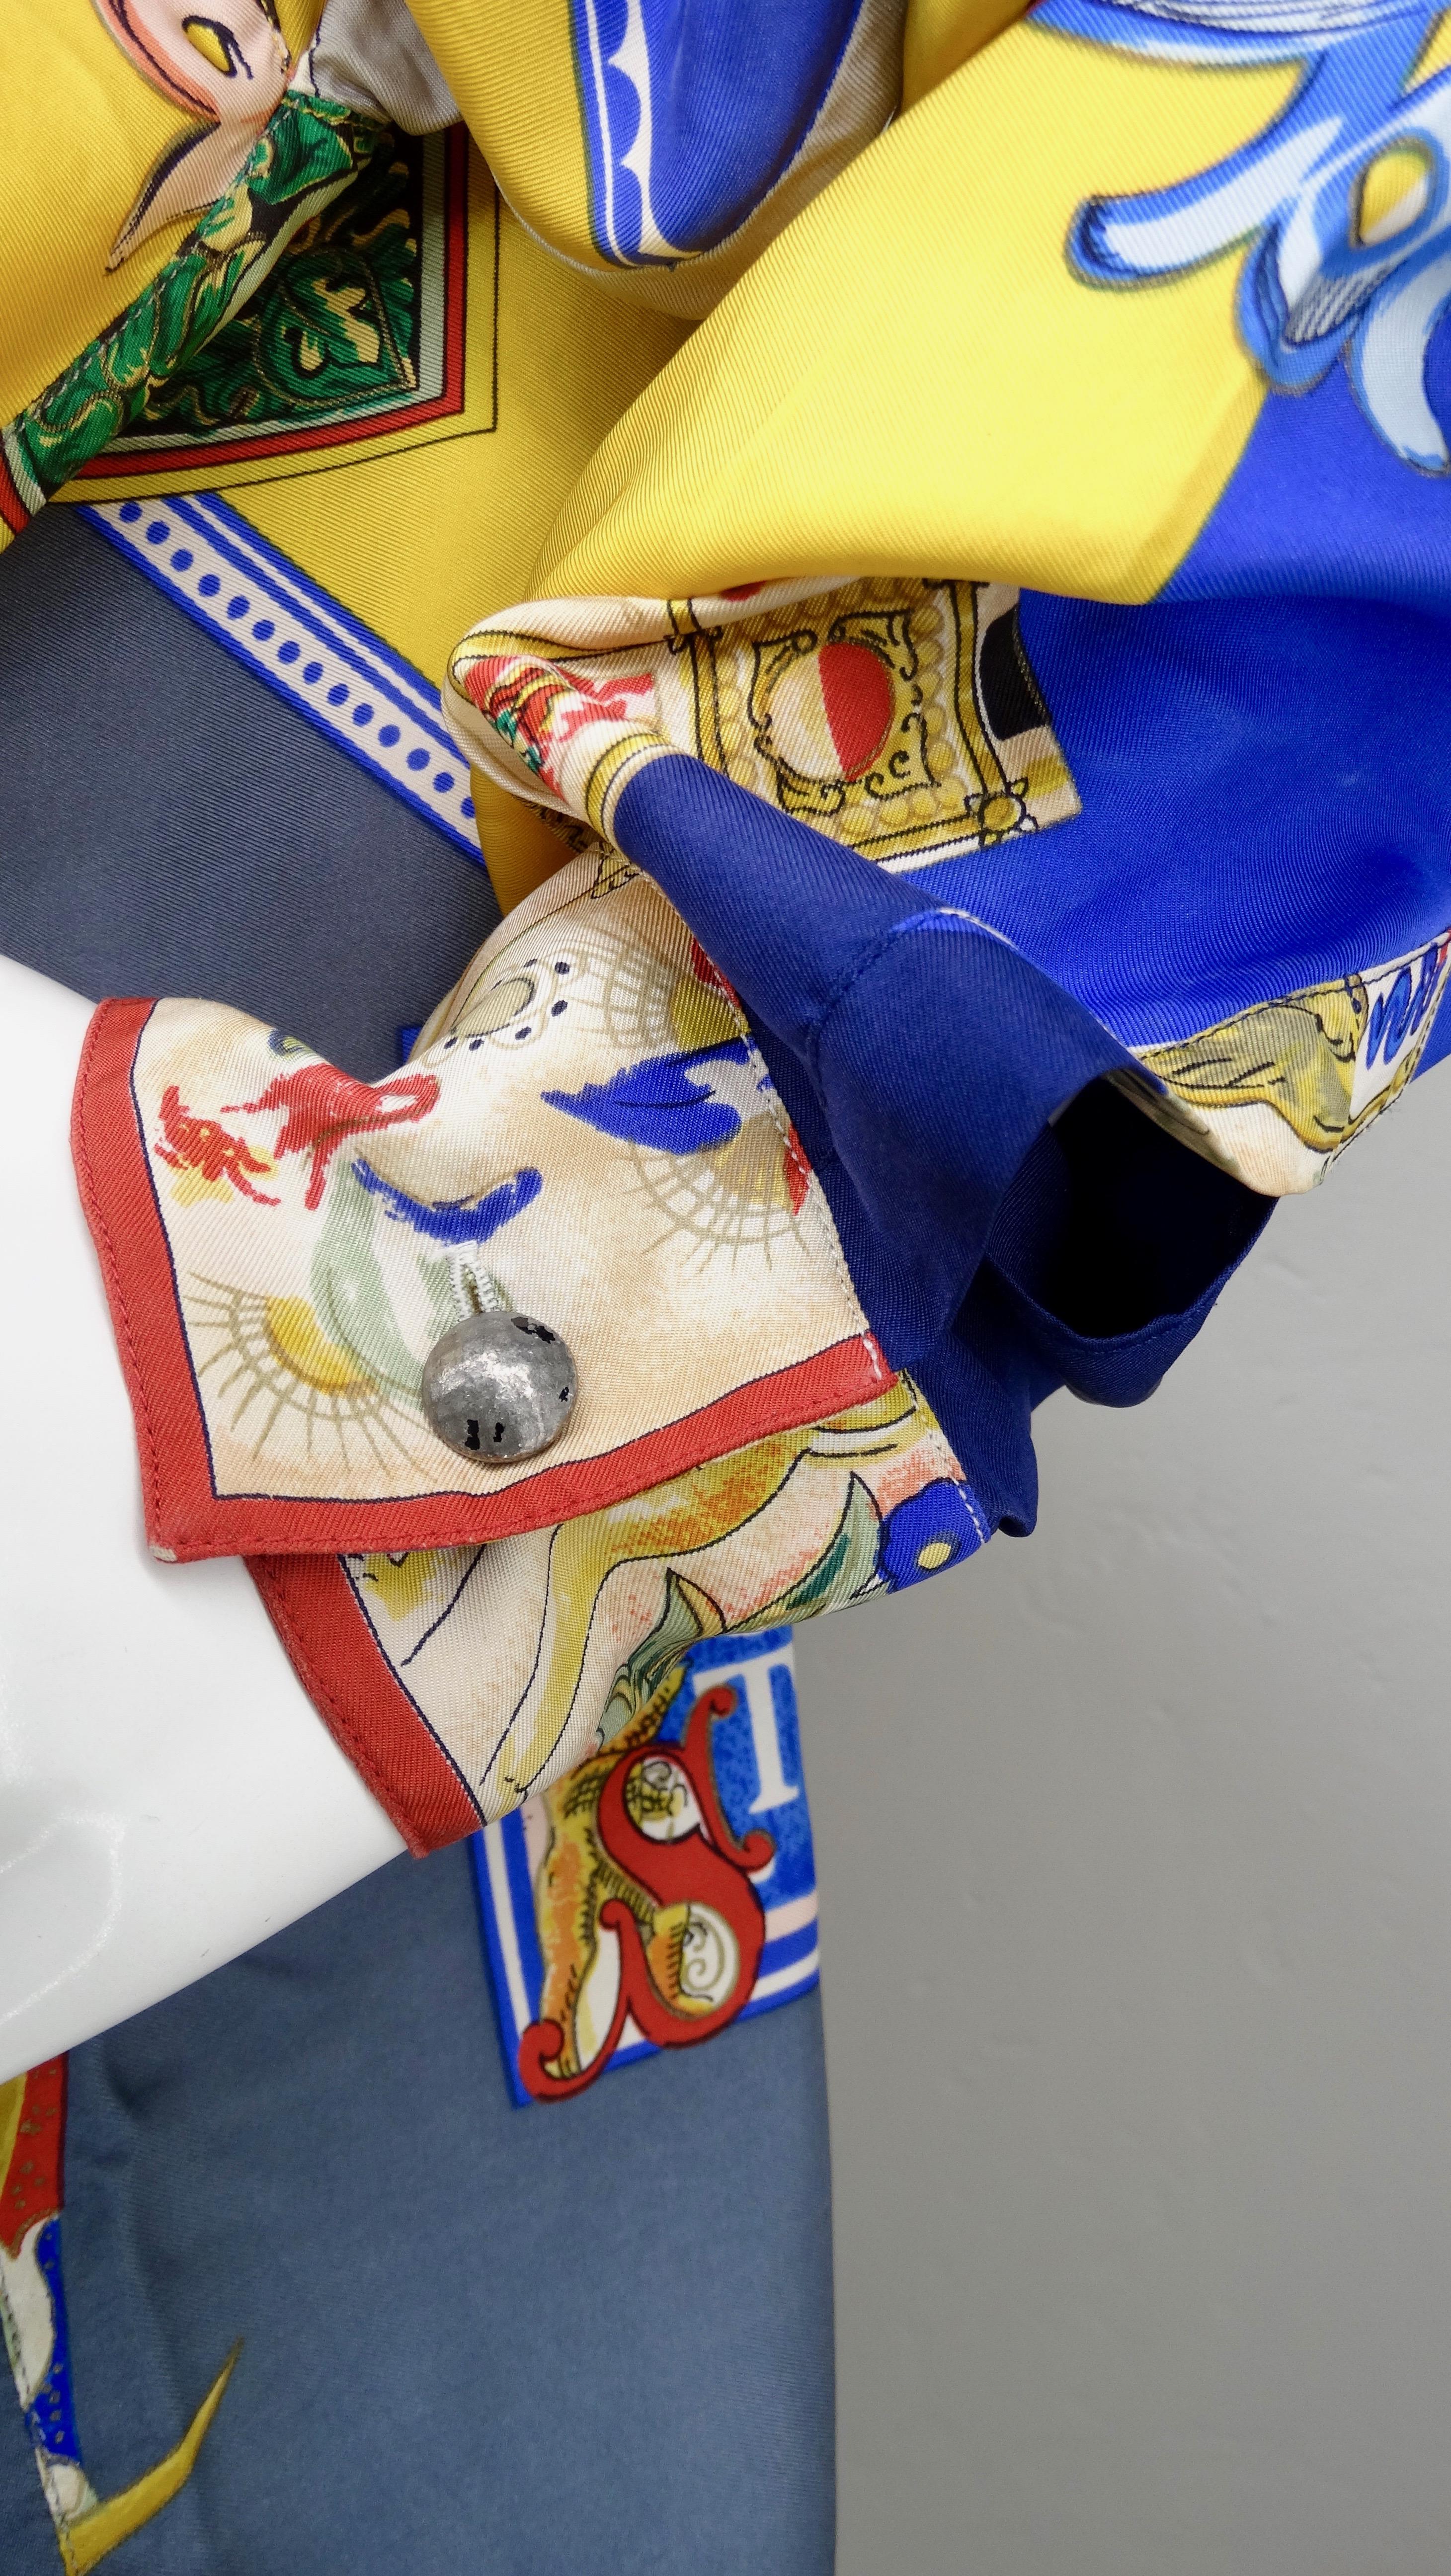 Gianni Versace 1990s Coat of Arms Silk Shirt  For Sale 1